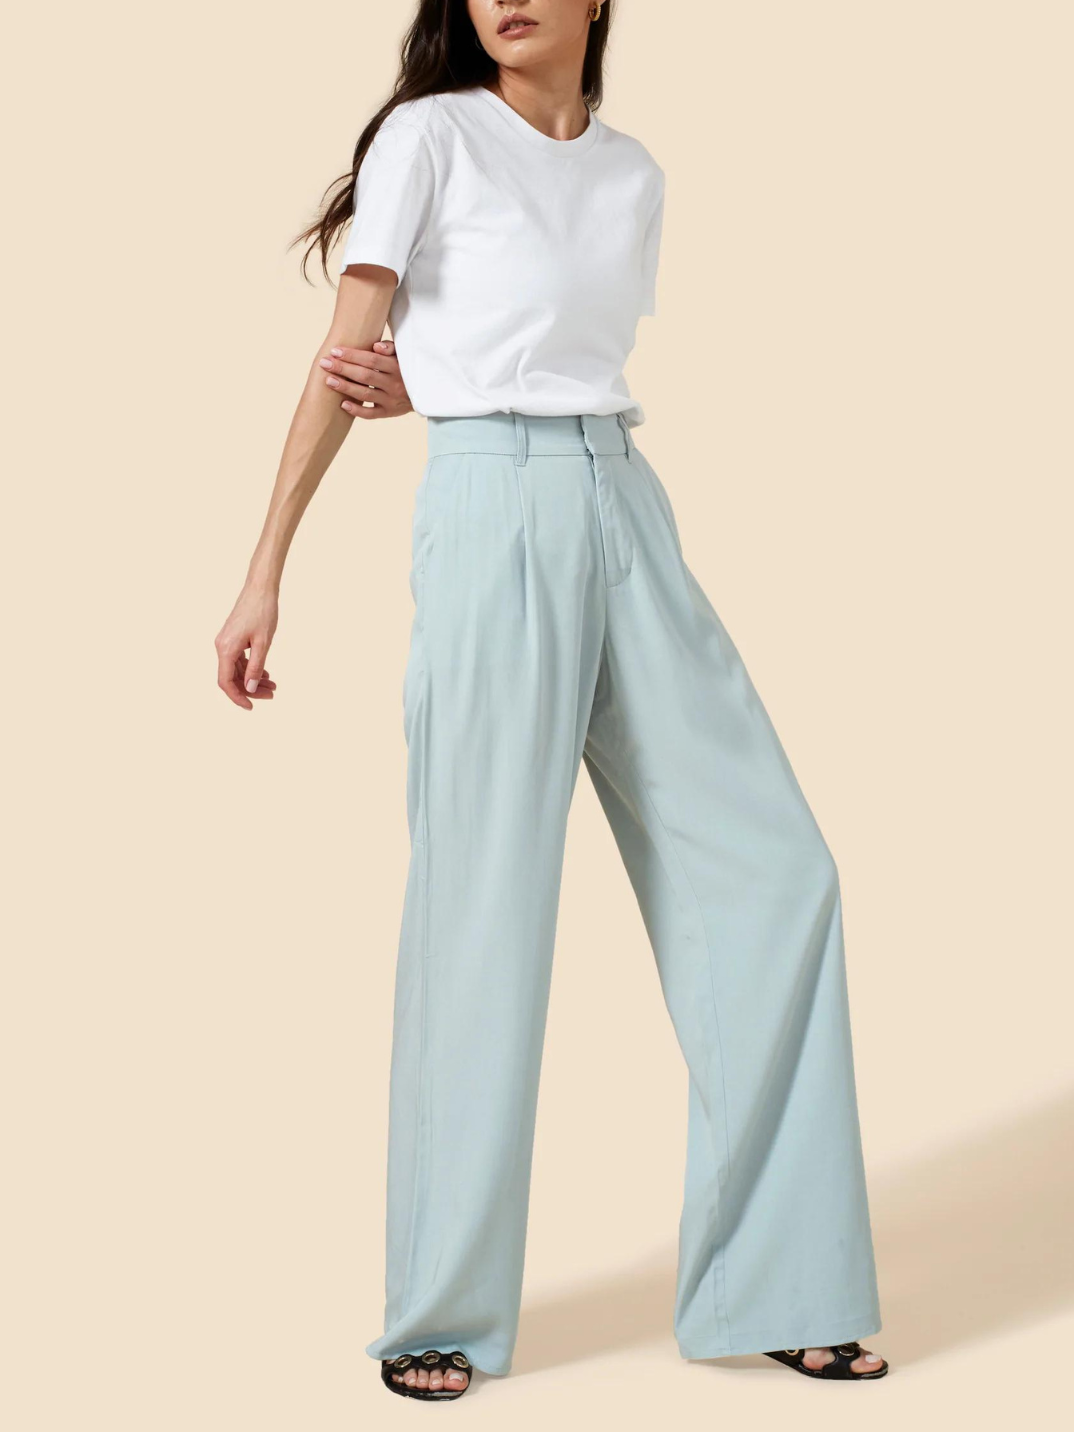 No capsule wardrobe is complete without that perfect pair of wide leg pants. Cut from an ultra-soft, lightweight natural fiber, the Willow Wide Leg Pants are a high-waisted design that elongate the silhouette. Featuring an elastic back waistband and side pockets, these pants guarantee tailored comfort. Ideal for an effortlessly cool look with sneakers, or occasion dressing with heels. Create a matching co-ordinated set with The Noah Blazer.